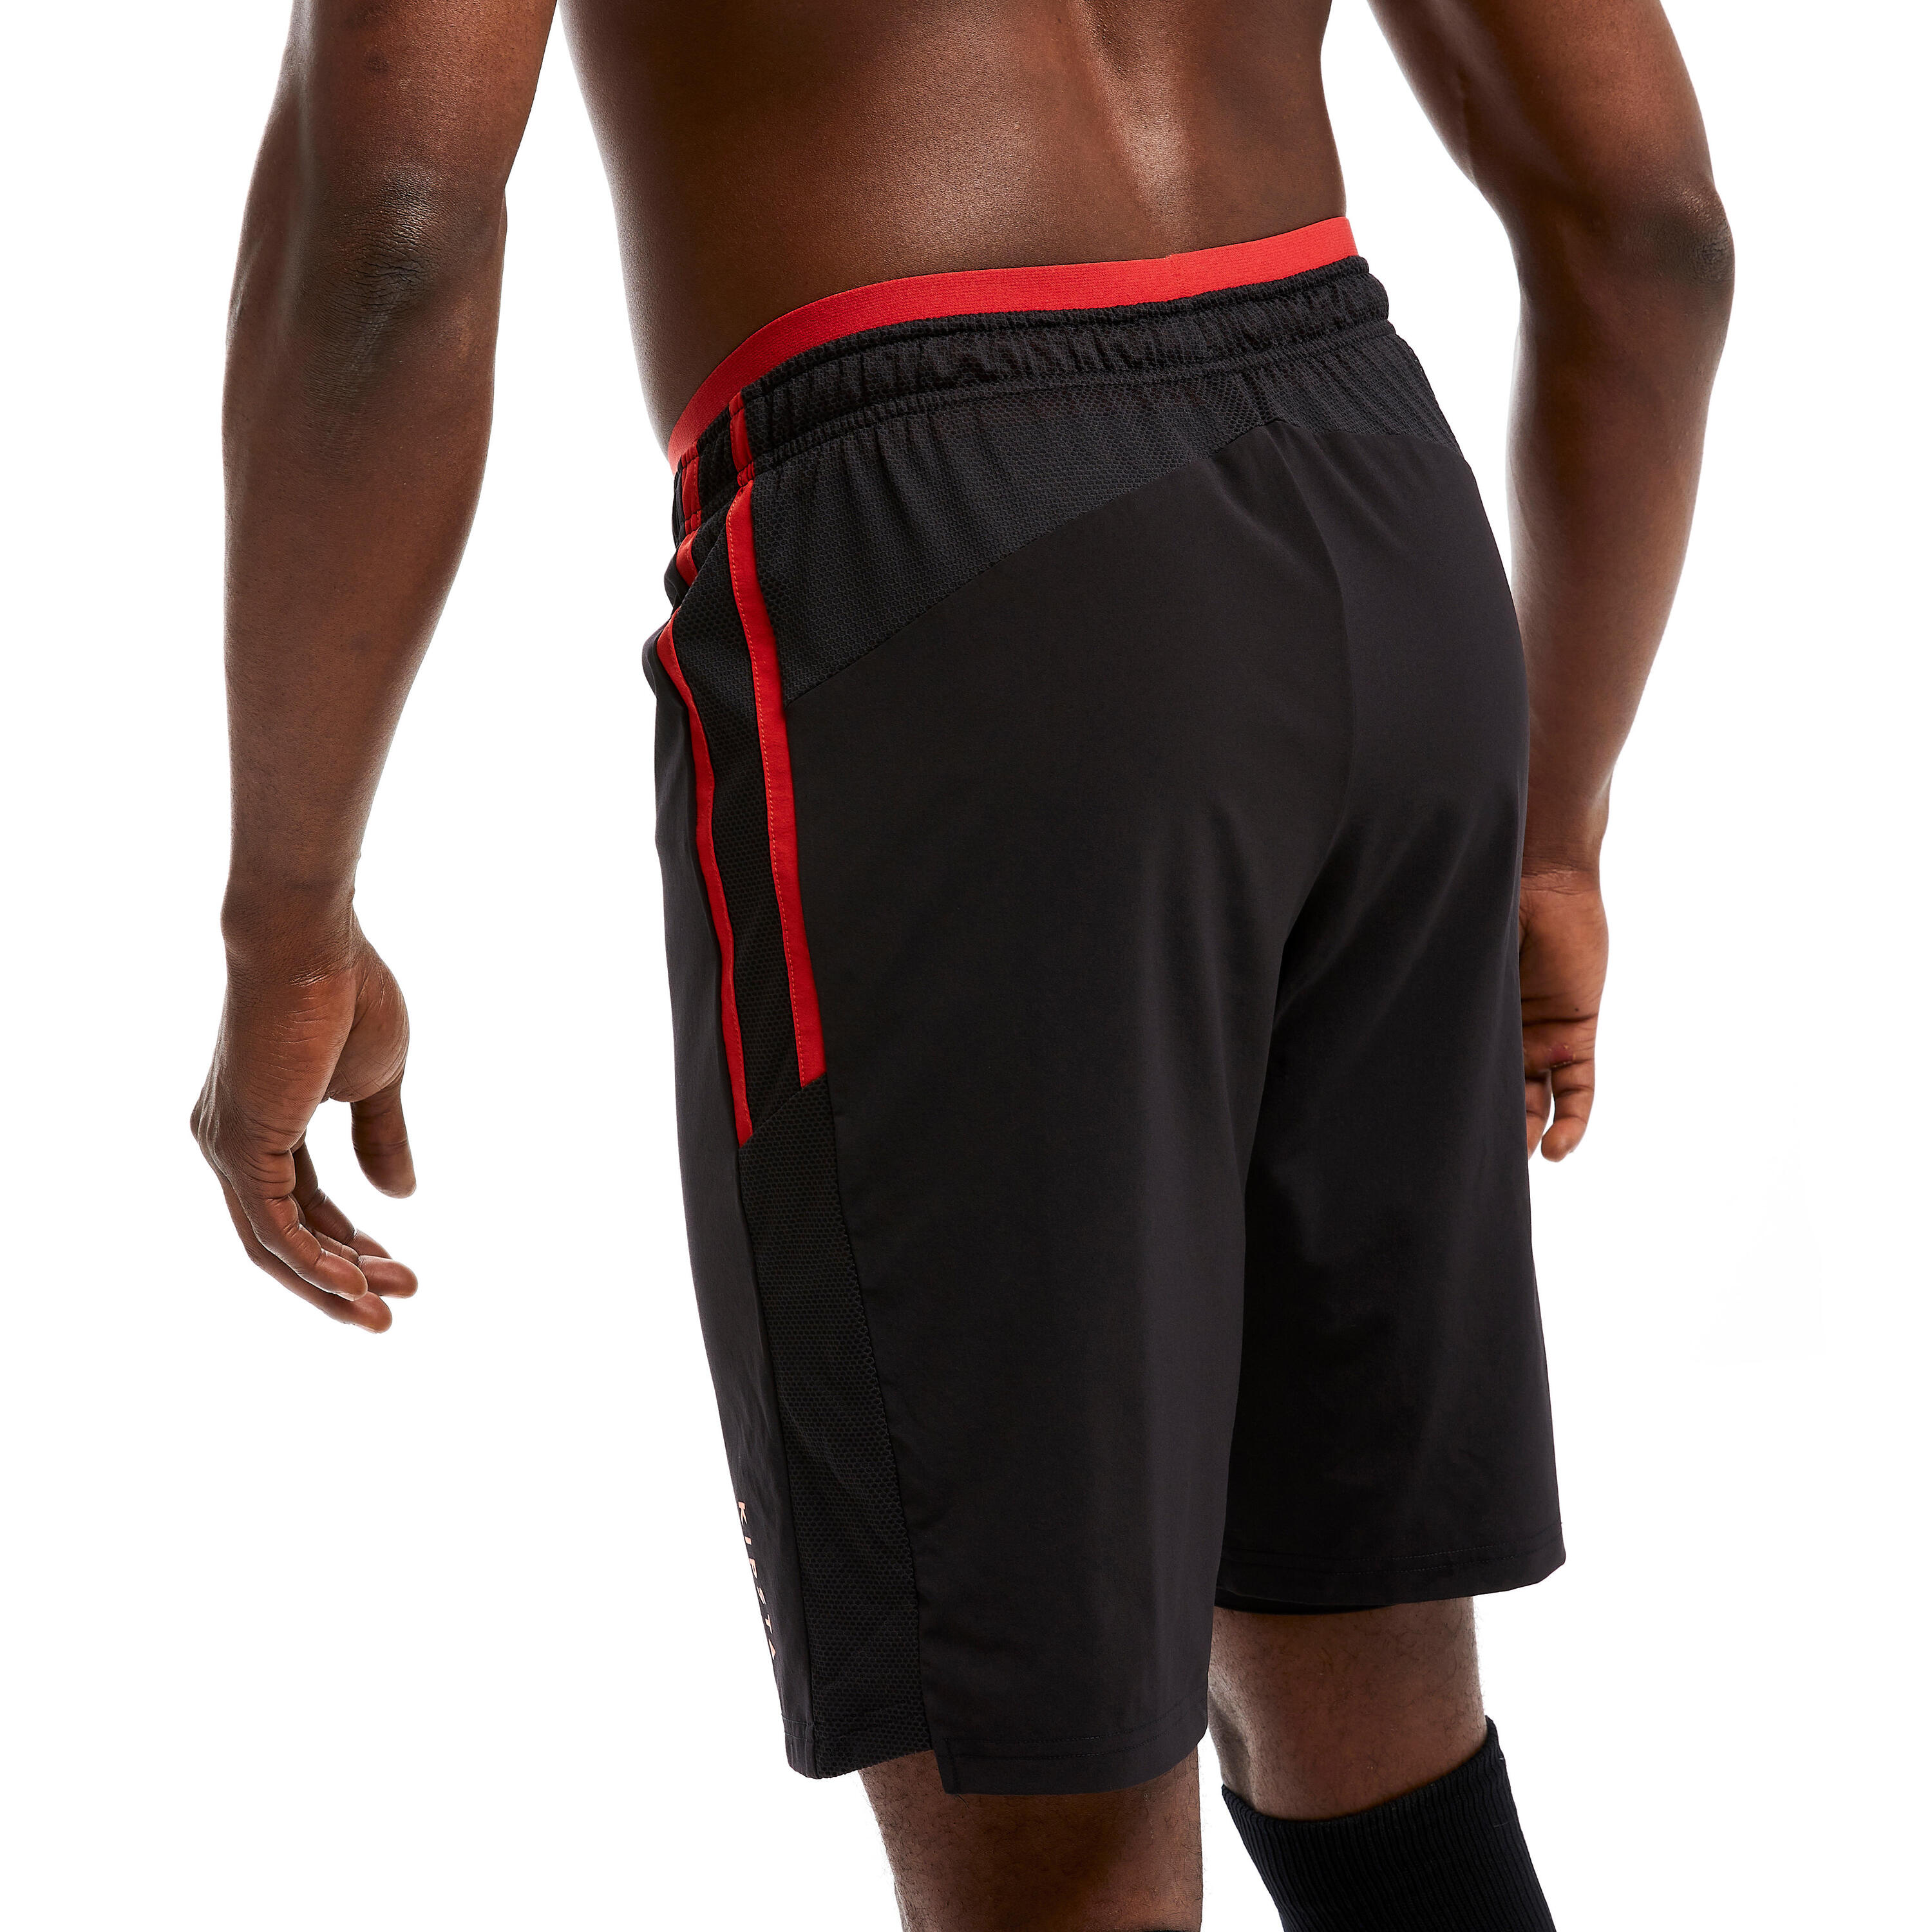 Adult 3-in-1 Football Shorts Traxium - Black/Red 6/9